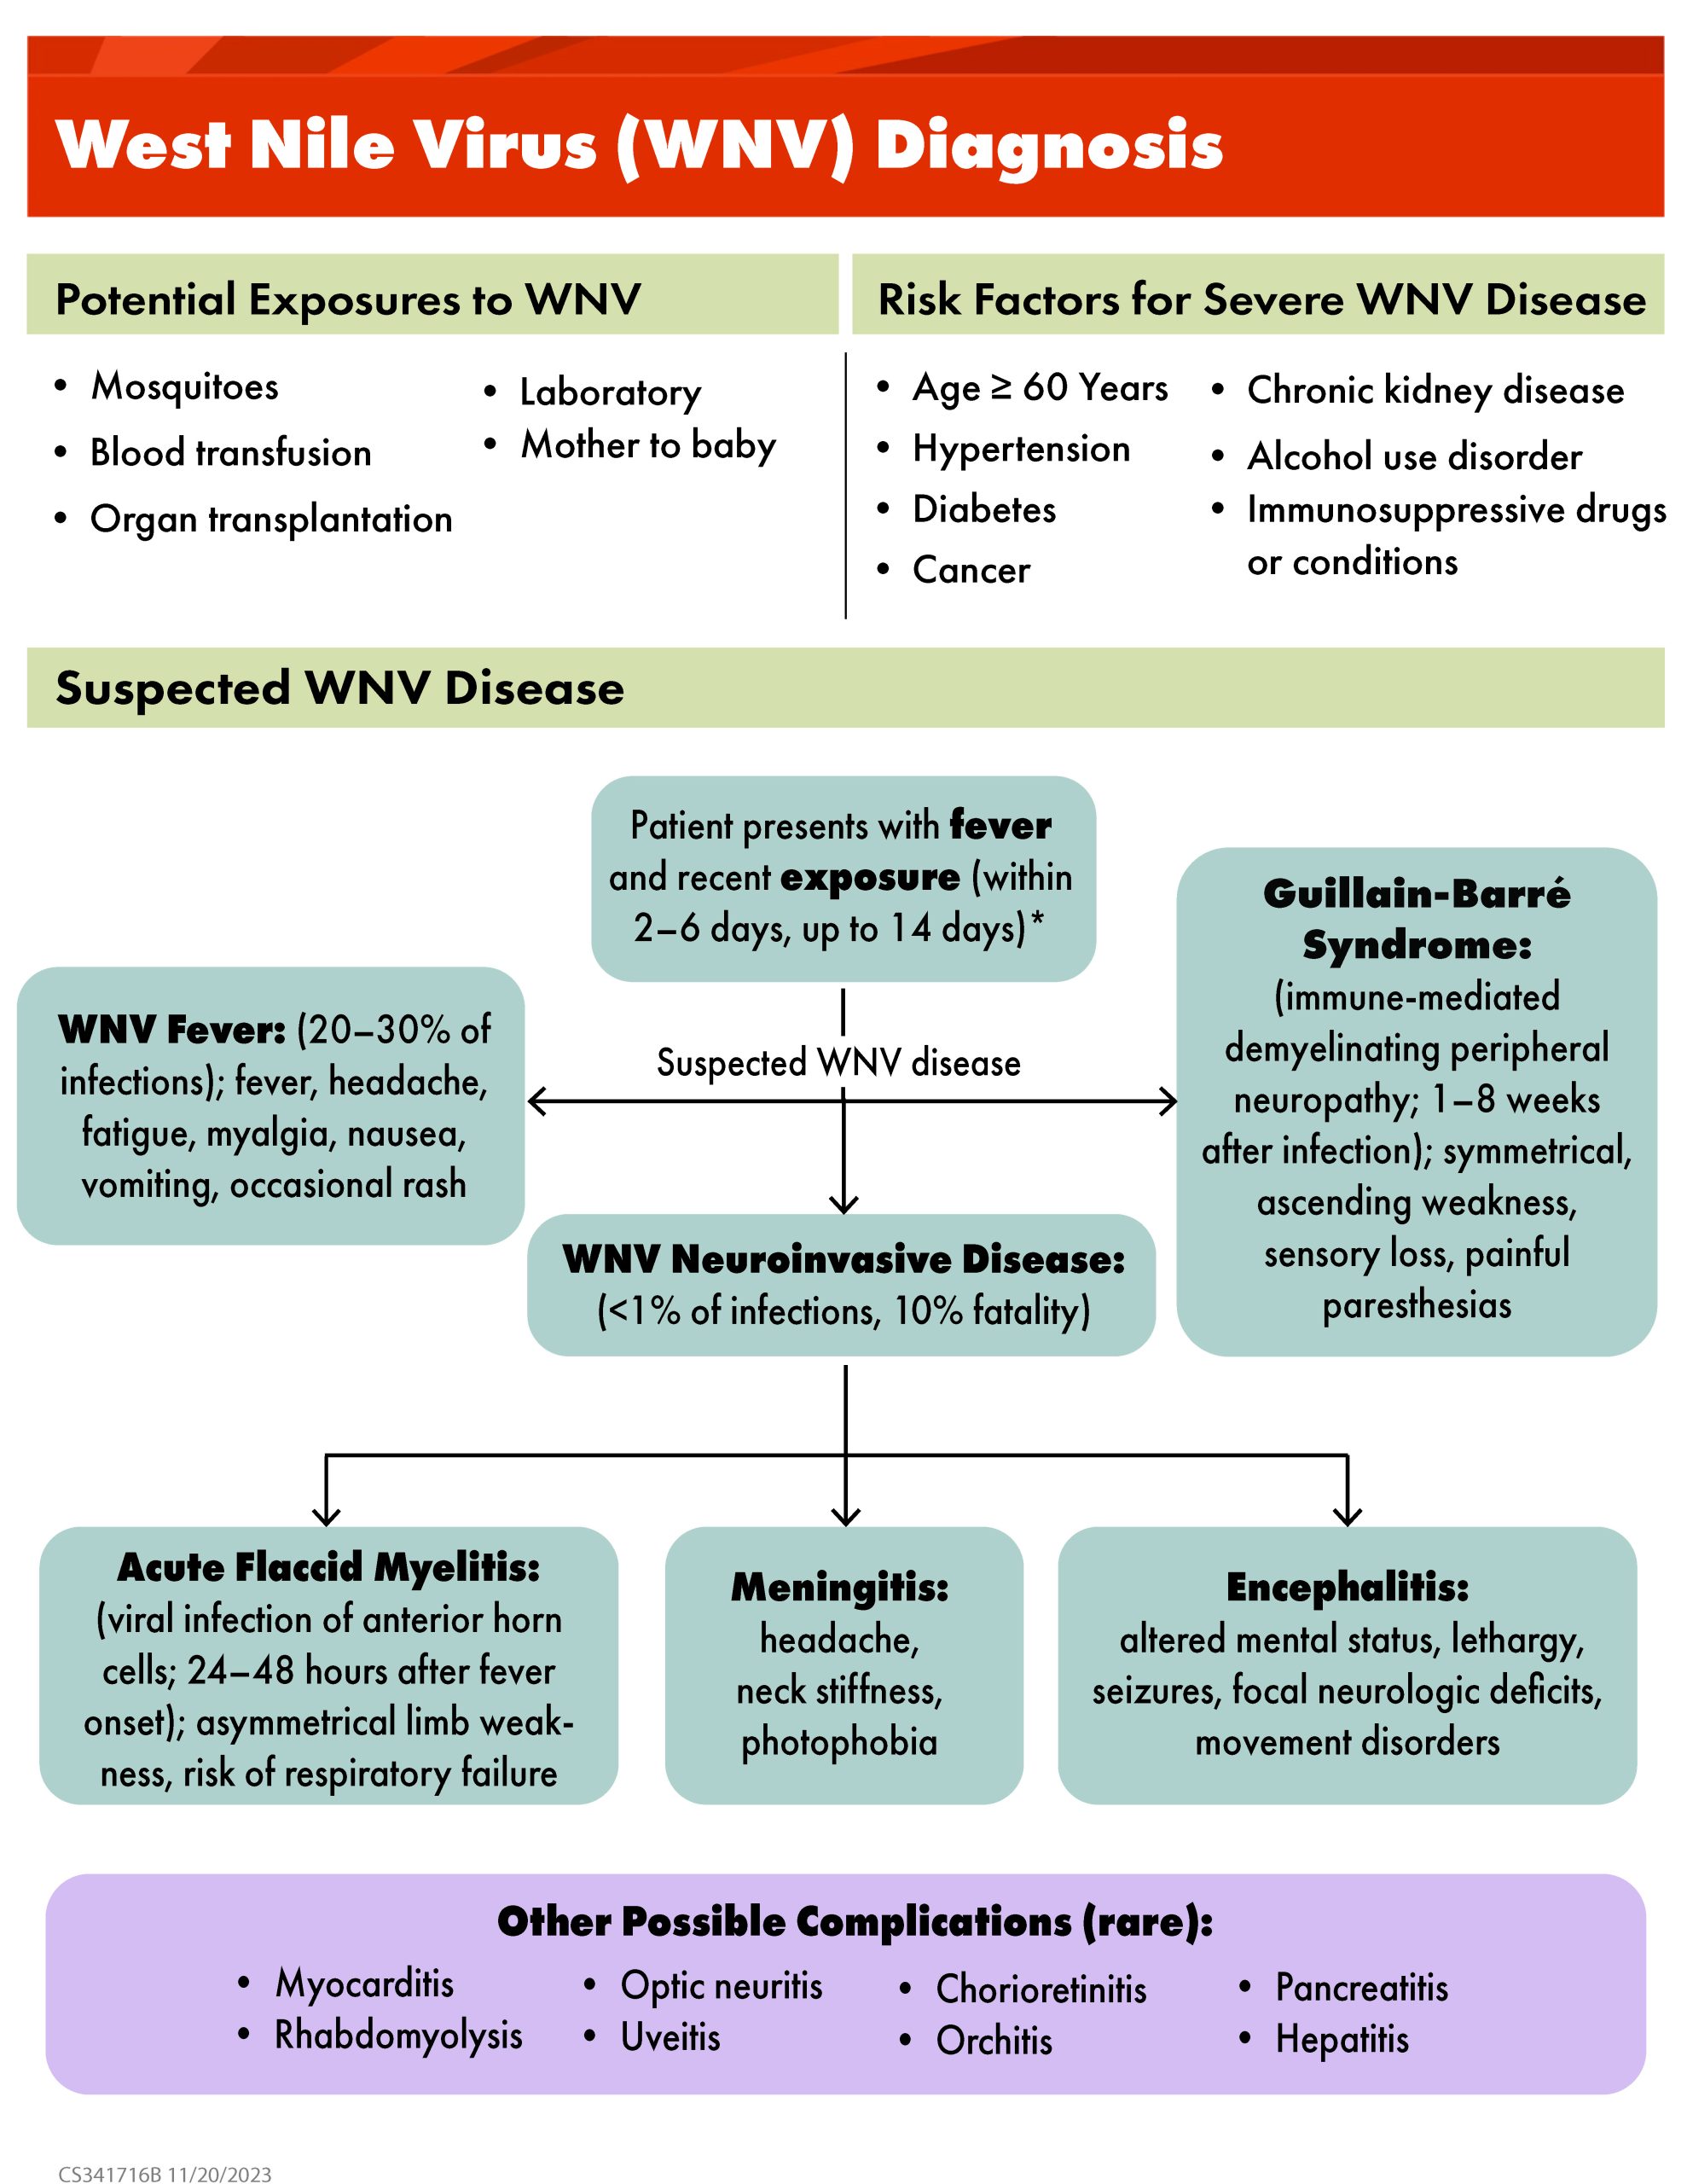 Image of a PDF infographic showing the potential exposures to West Nile virus, the Risk factors for severe West Nile virus disease, and description of clinical characteristics that could lead to suspected West Nile virus disease. Other possible complications are also included.